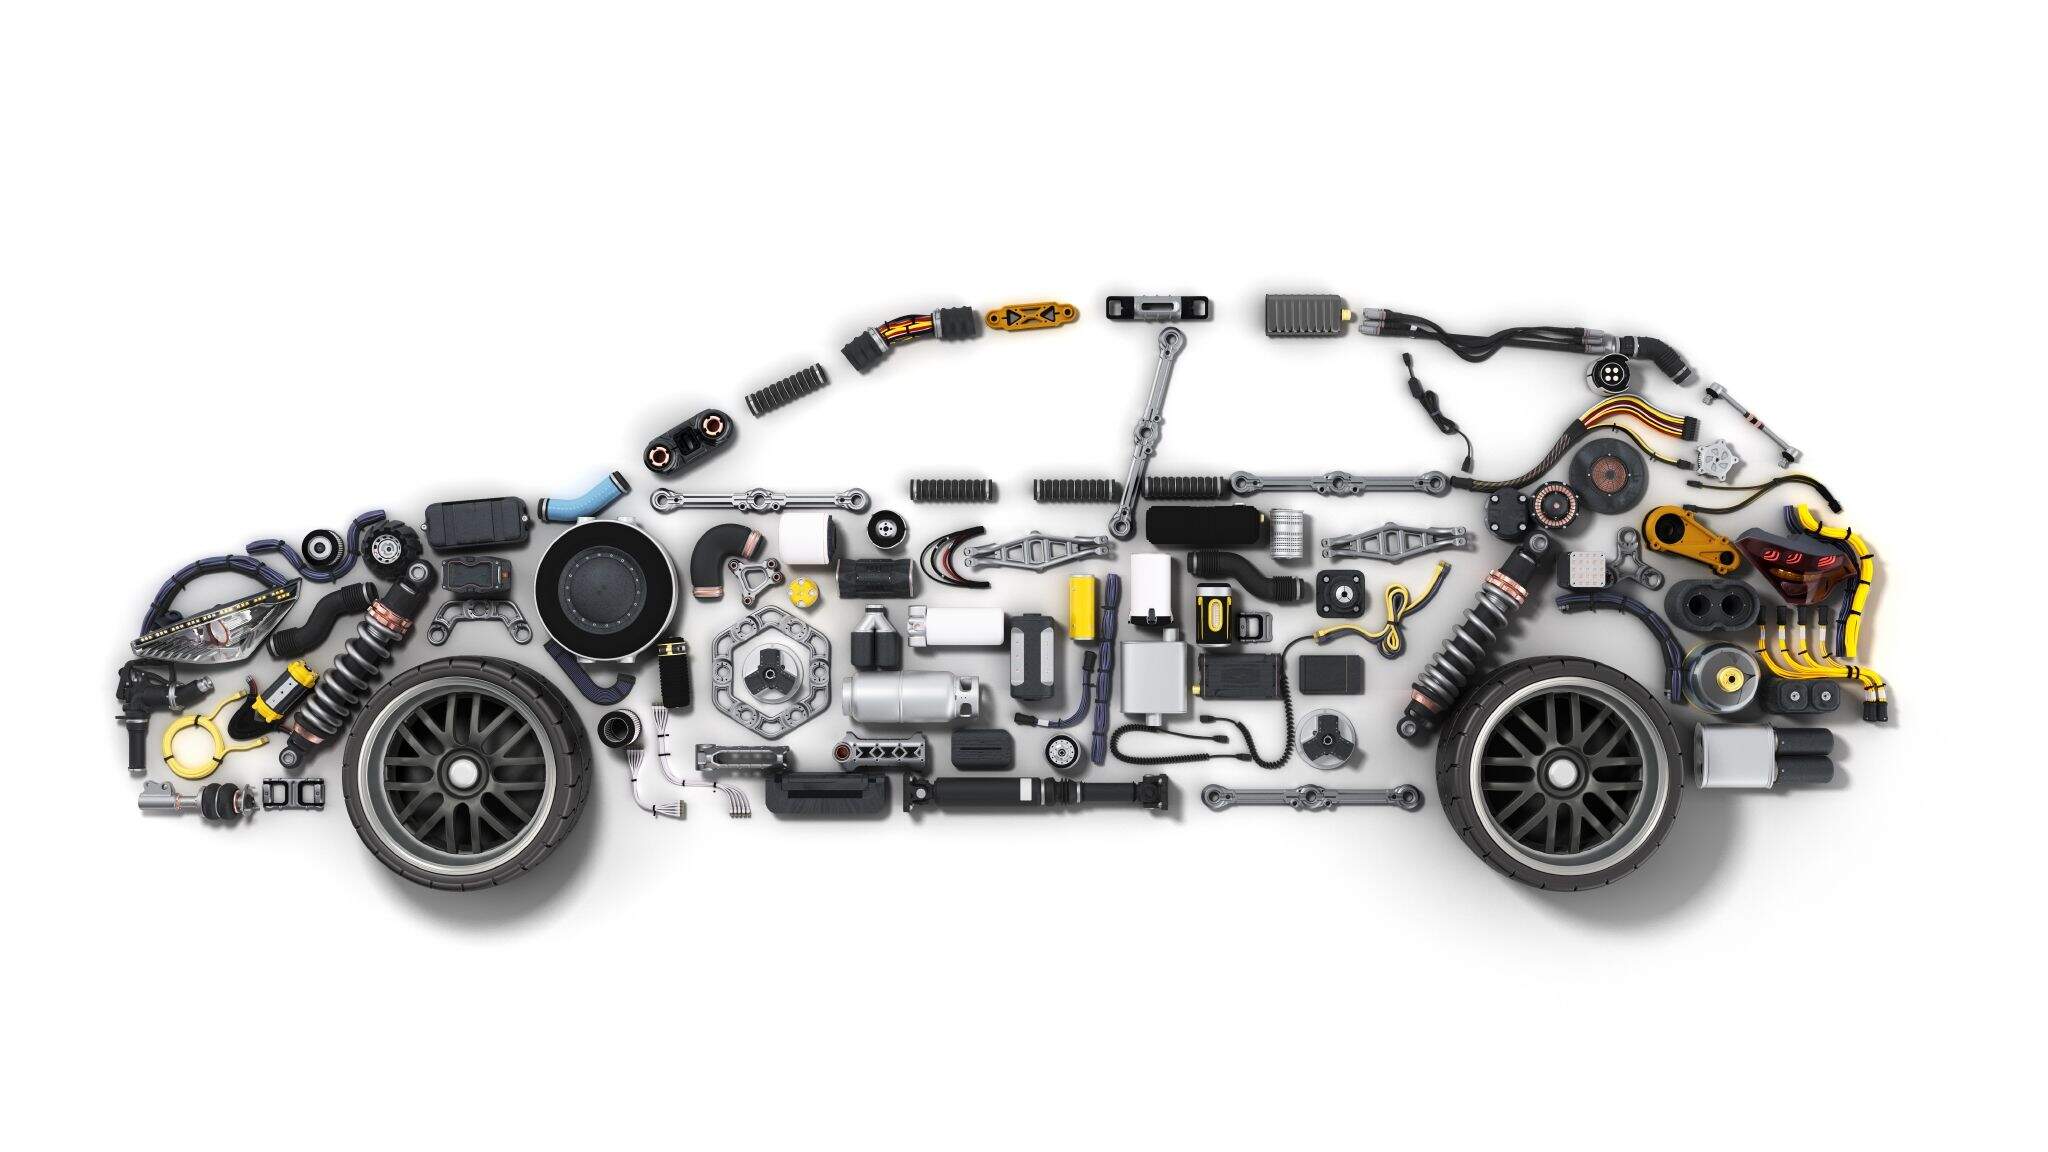 A completely built car comprises of numerous parts, printed circuit boards (PCBs) are among some of them.